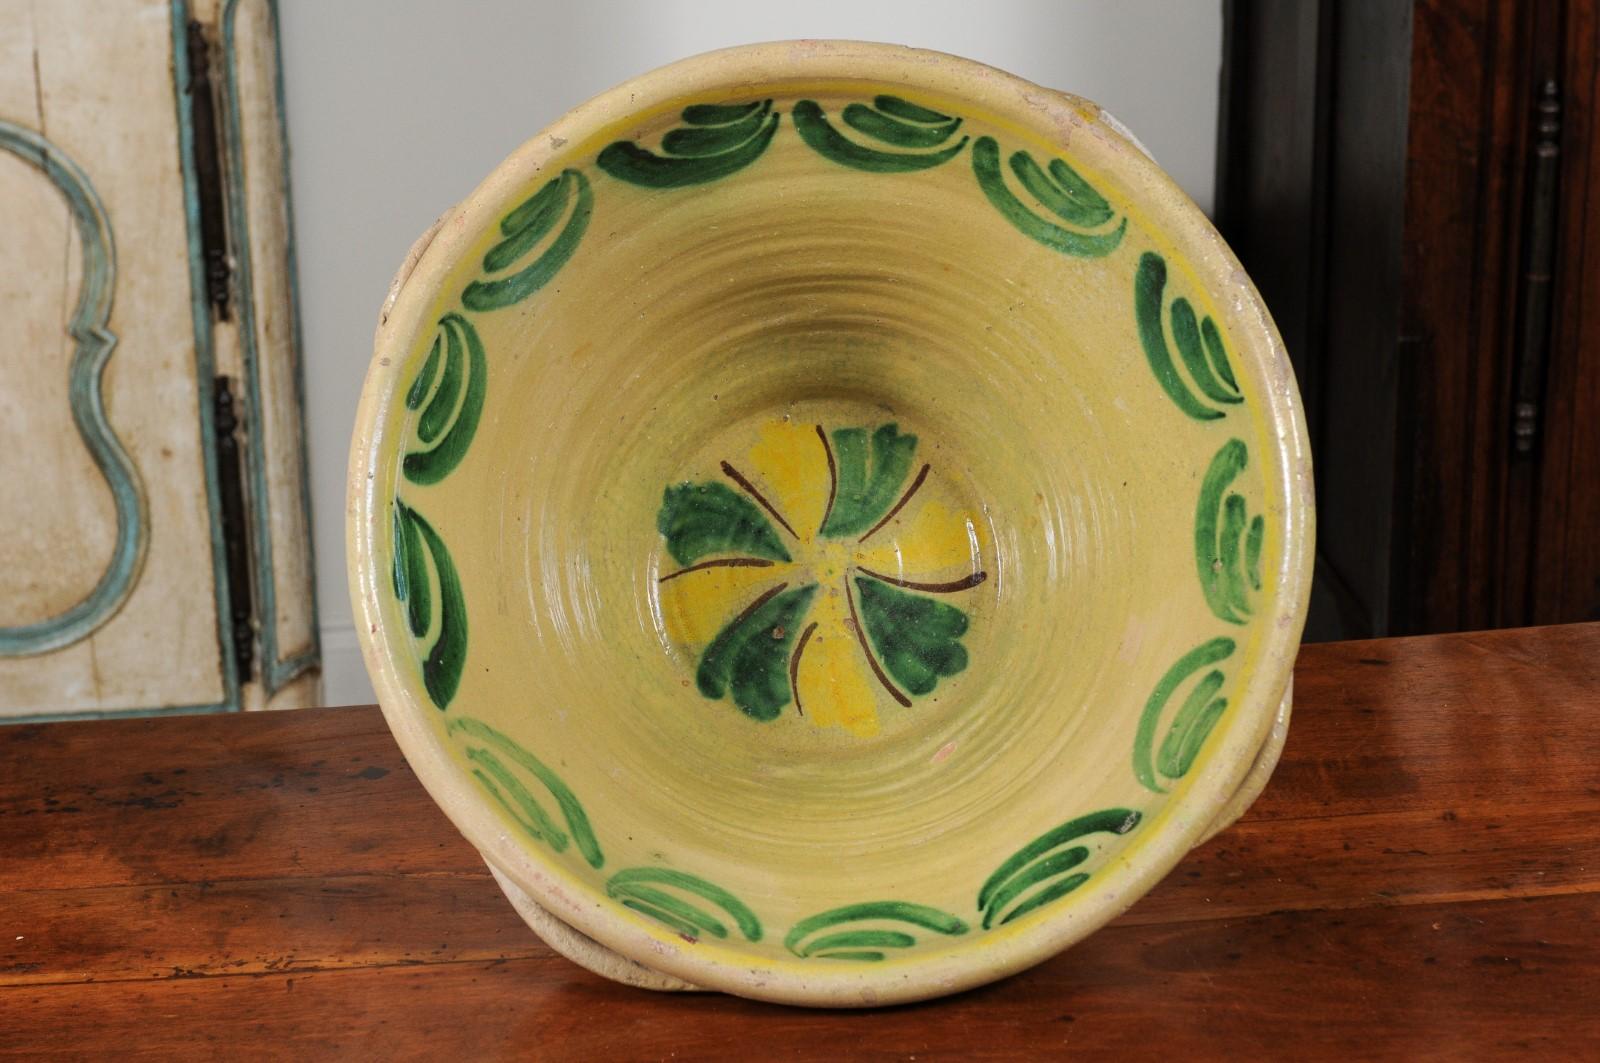 Italian 1820s Yellow Glazed Pottery Bowl from Calabria with Green Accents For Sale 4